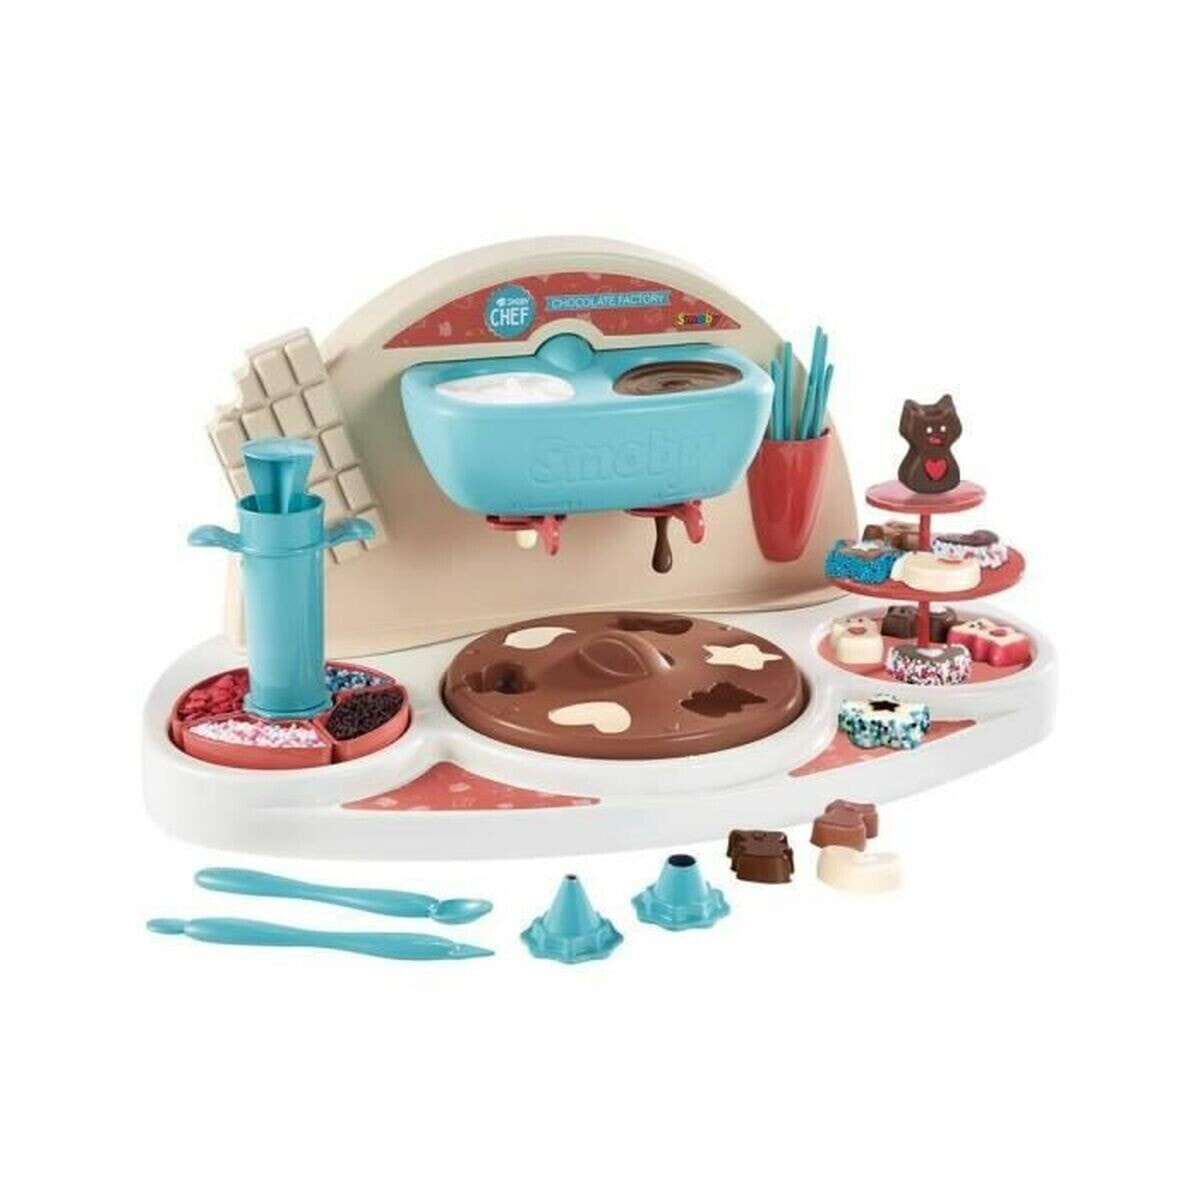 Toy kitchen Smoby Chef Chocolat Factory